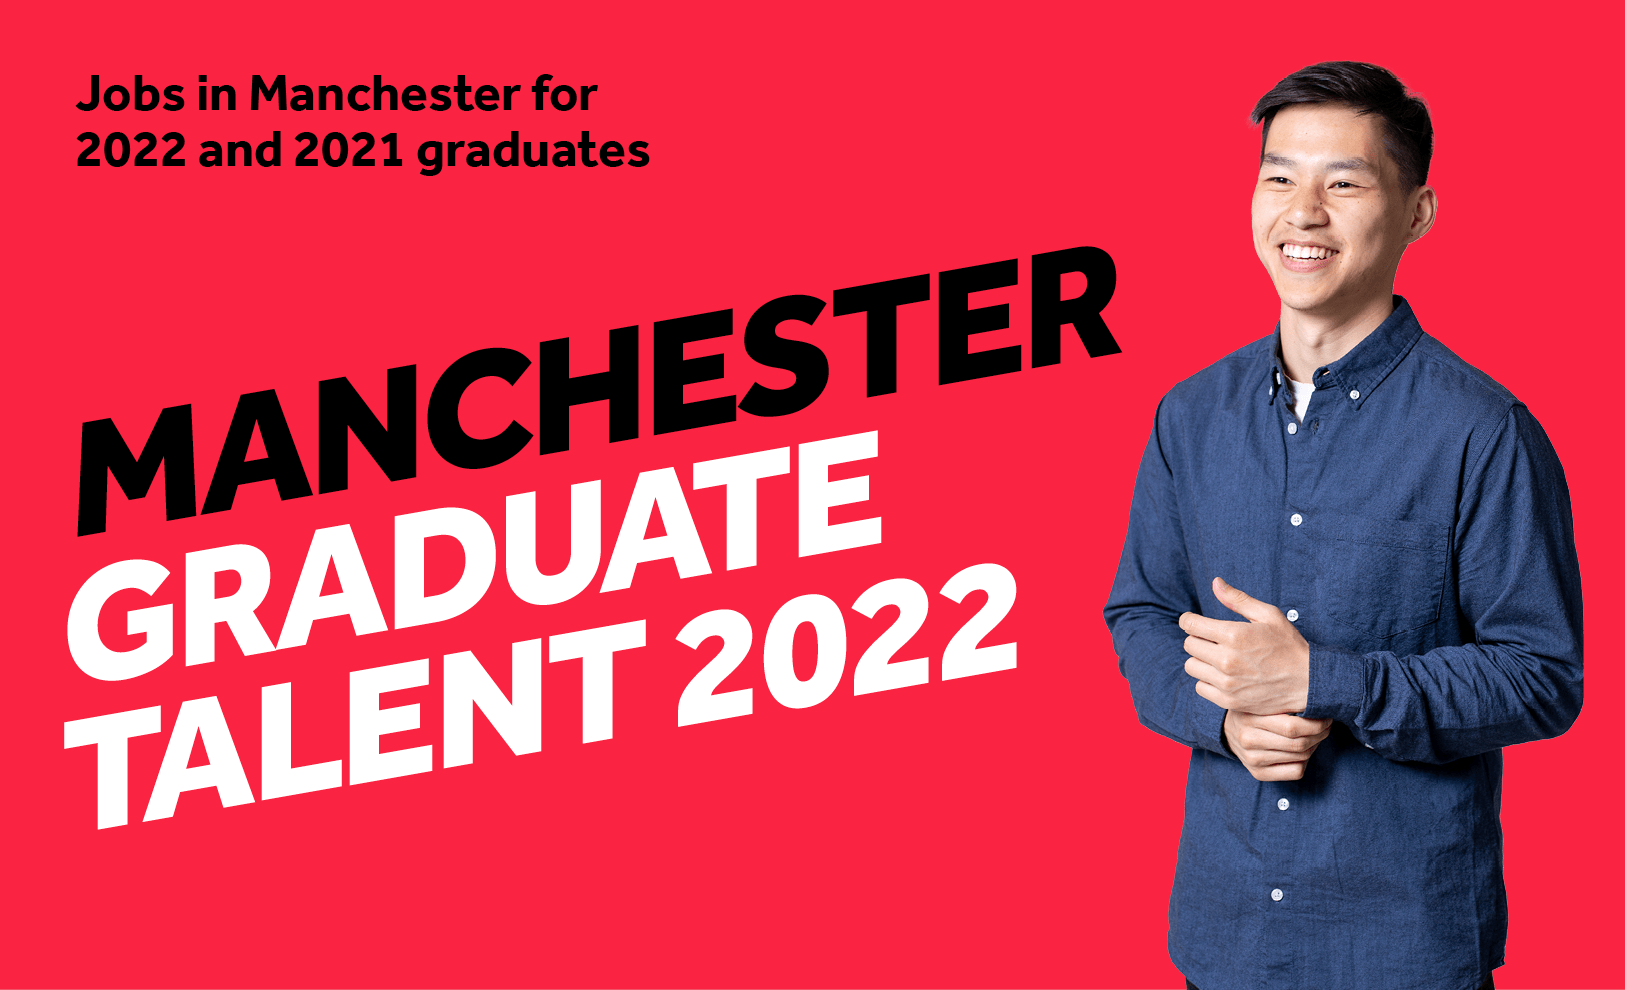 Male student in blue shirt on red background: wording reads Manchester graduate talent 2022: Jobs in Manchester for 2021 and 2022 grdauates 